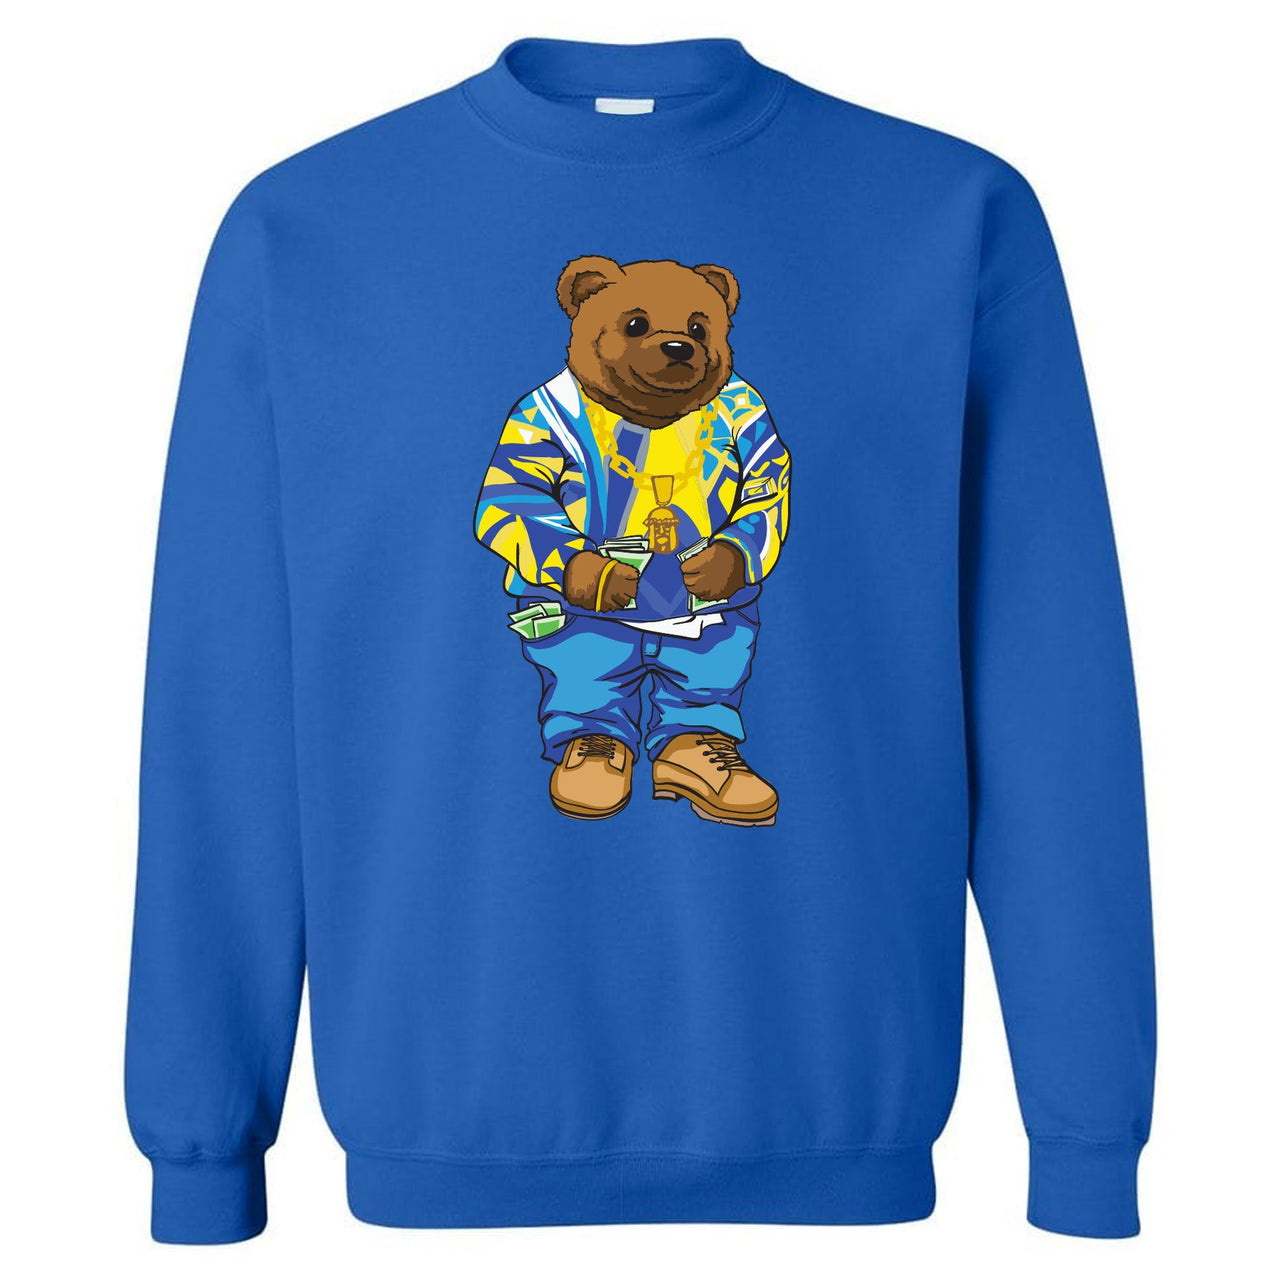 Printed on the front of the Air Jordan 5 Alternate Laney sneaker matching blue crewneck is the Sweater Bear wearing a coogi sweater that matches the Air Jordan 5 Laney sneakers